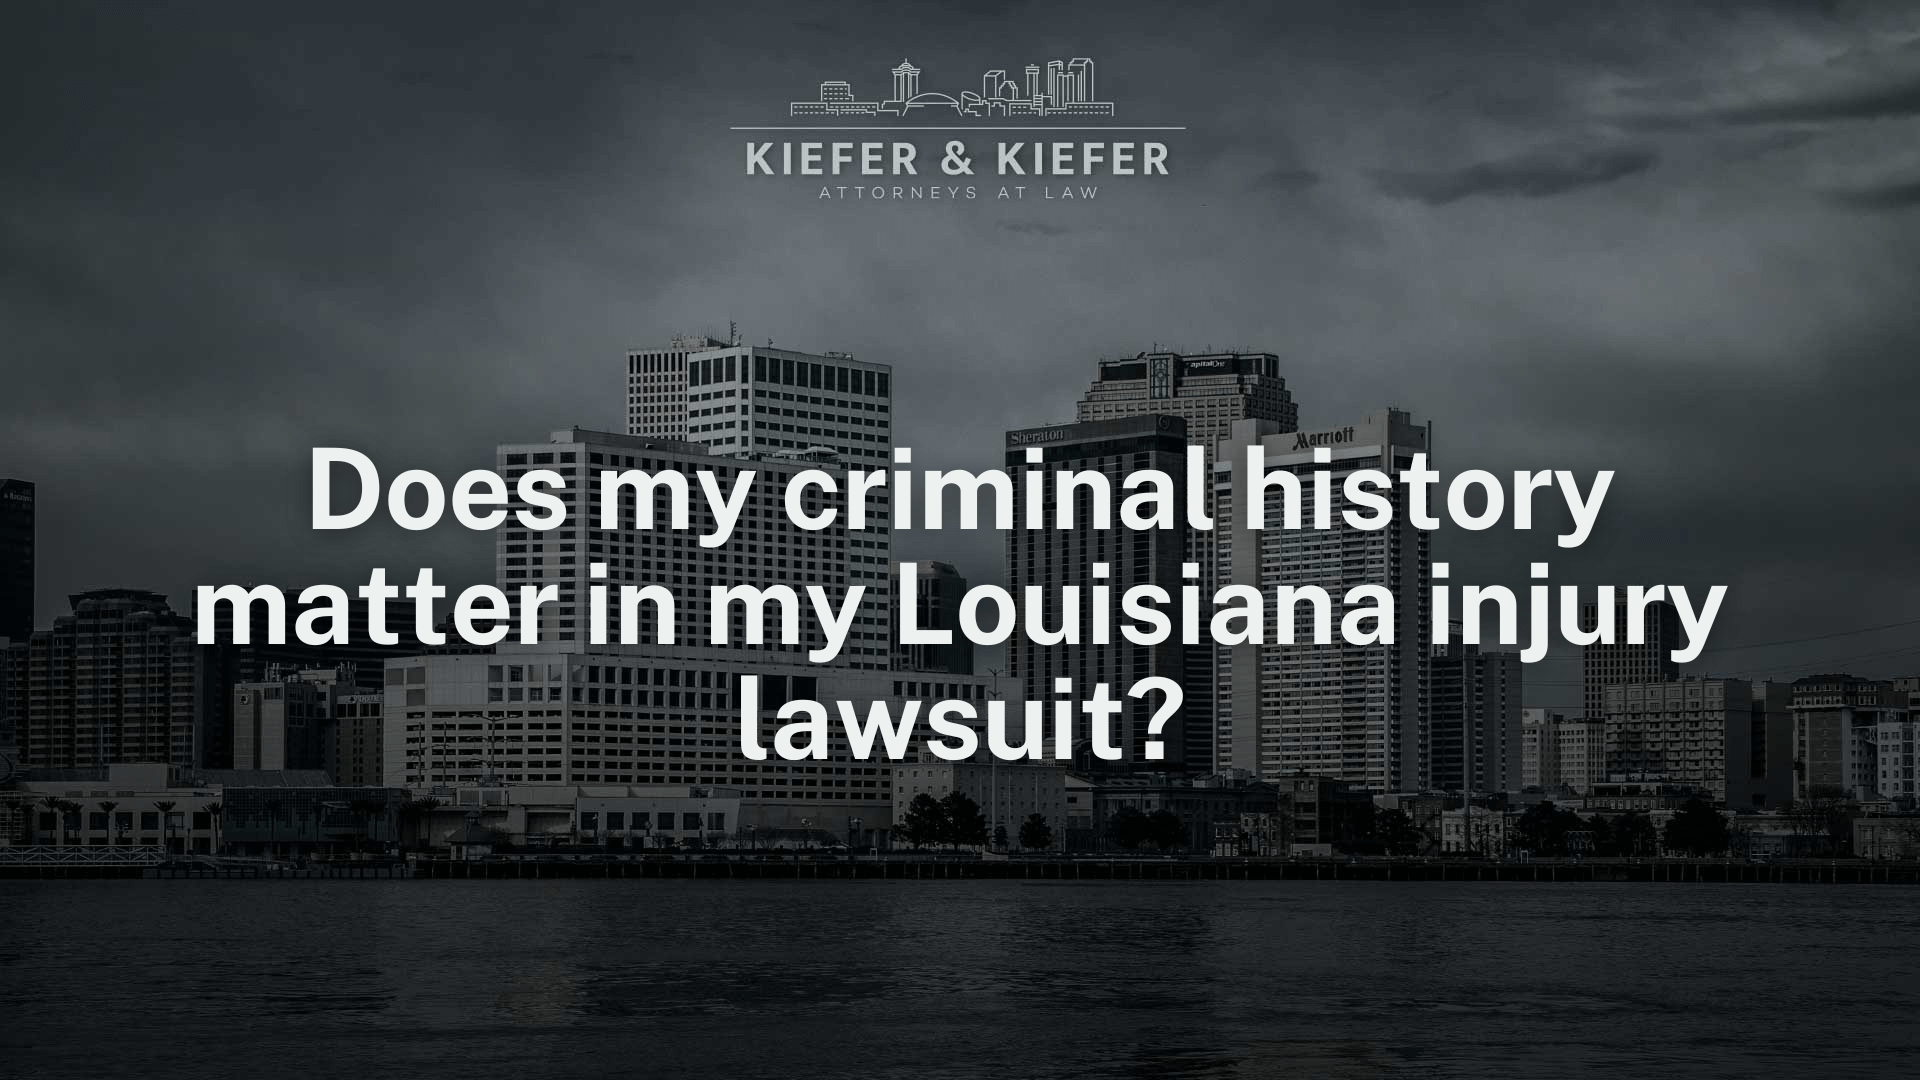 Does my criminal history matter in my Louisiana injury lawsuit - Kiefer & Kiefer New Orleans Personal Injury Attorneys